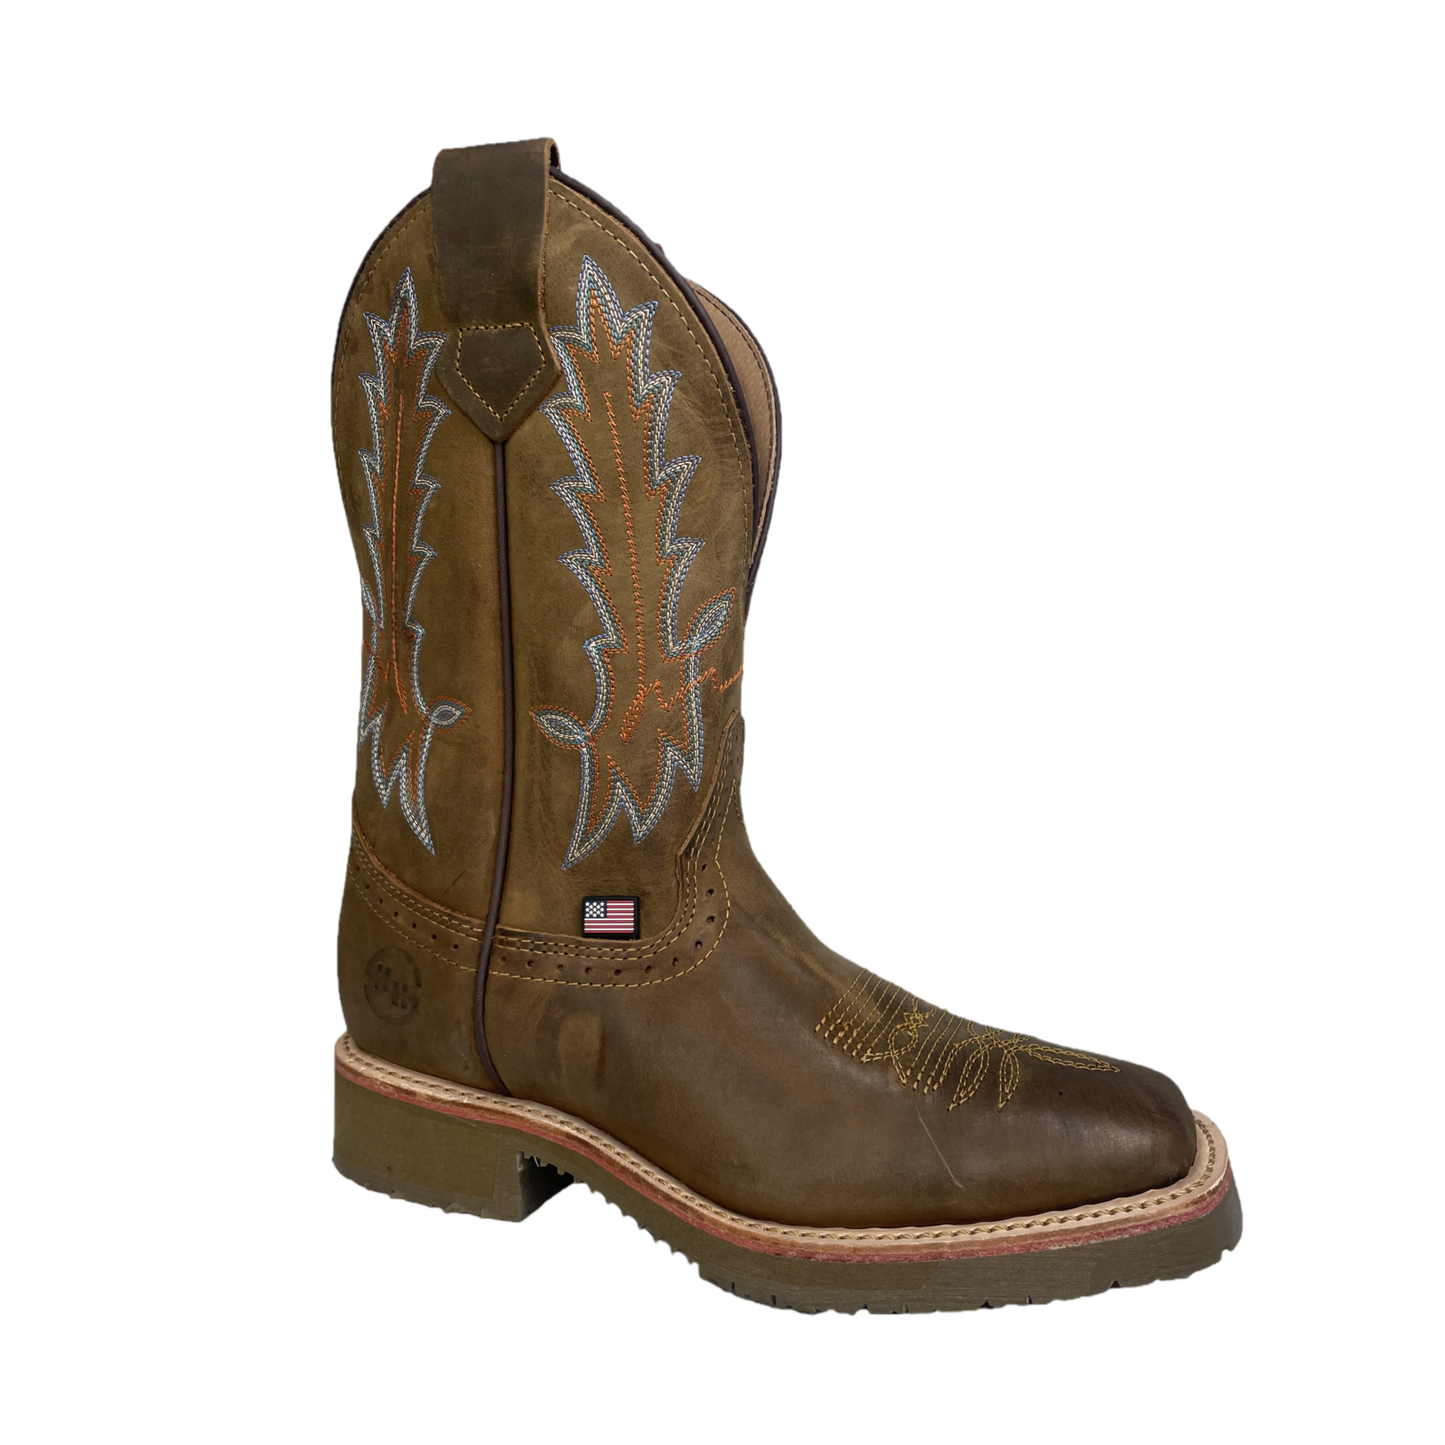 Double H® Men's Wilderness Buttercup Square Toe Light Brown Boots DH4568